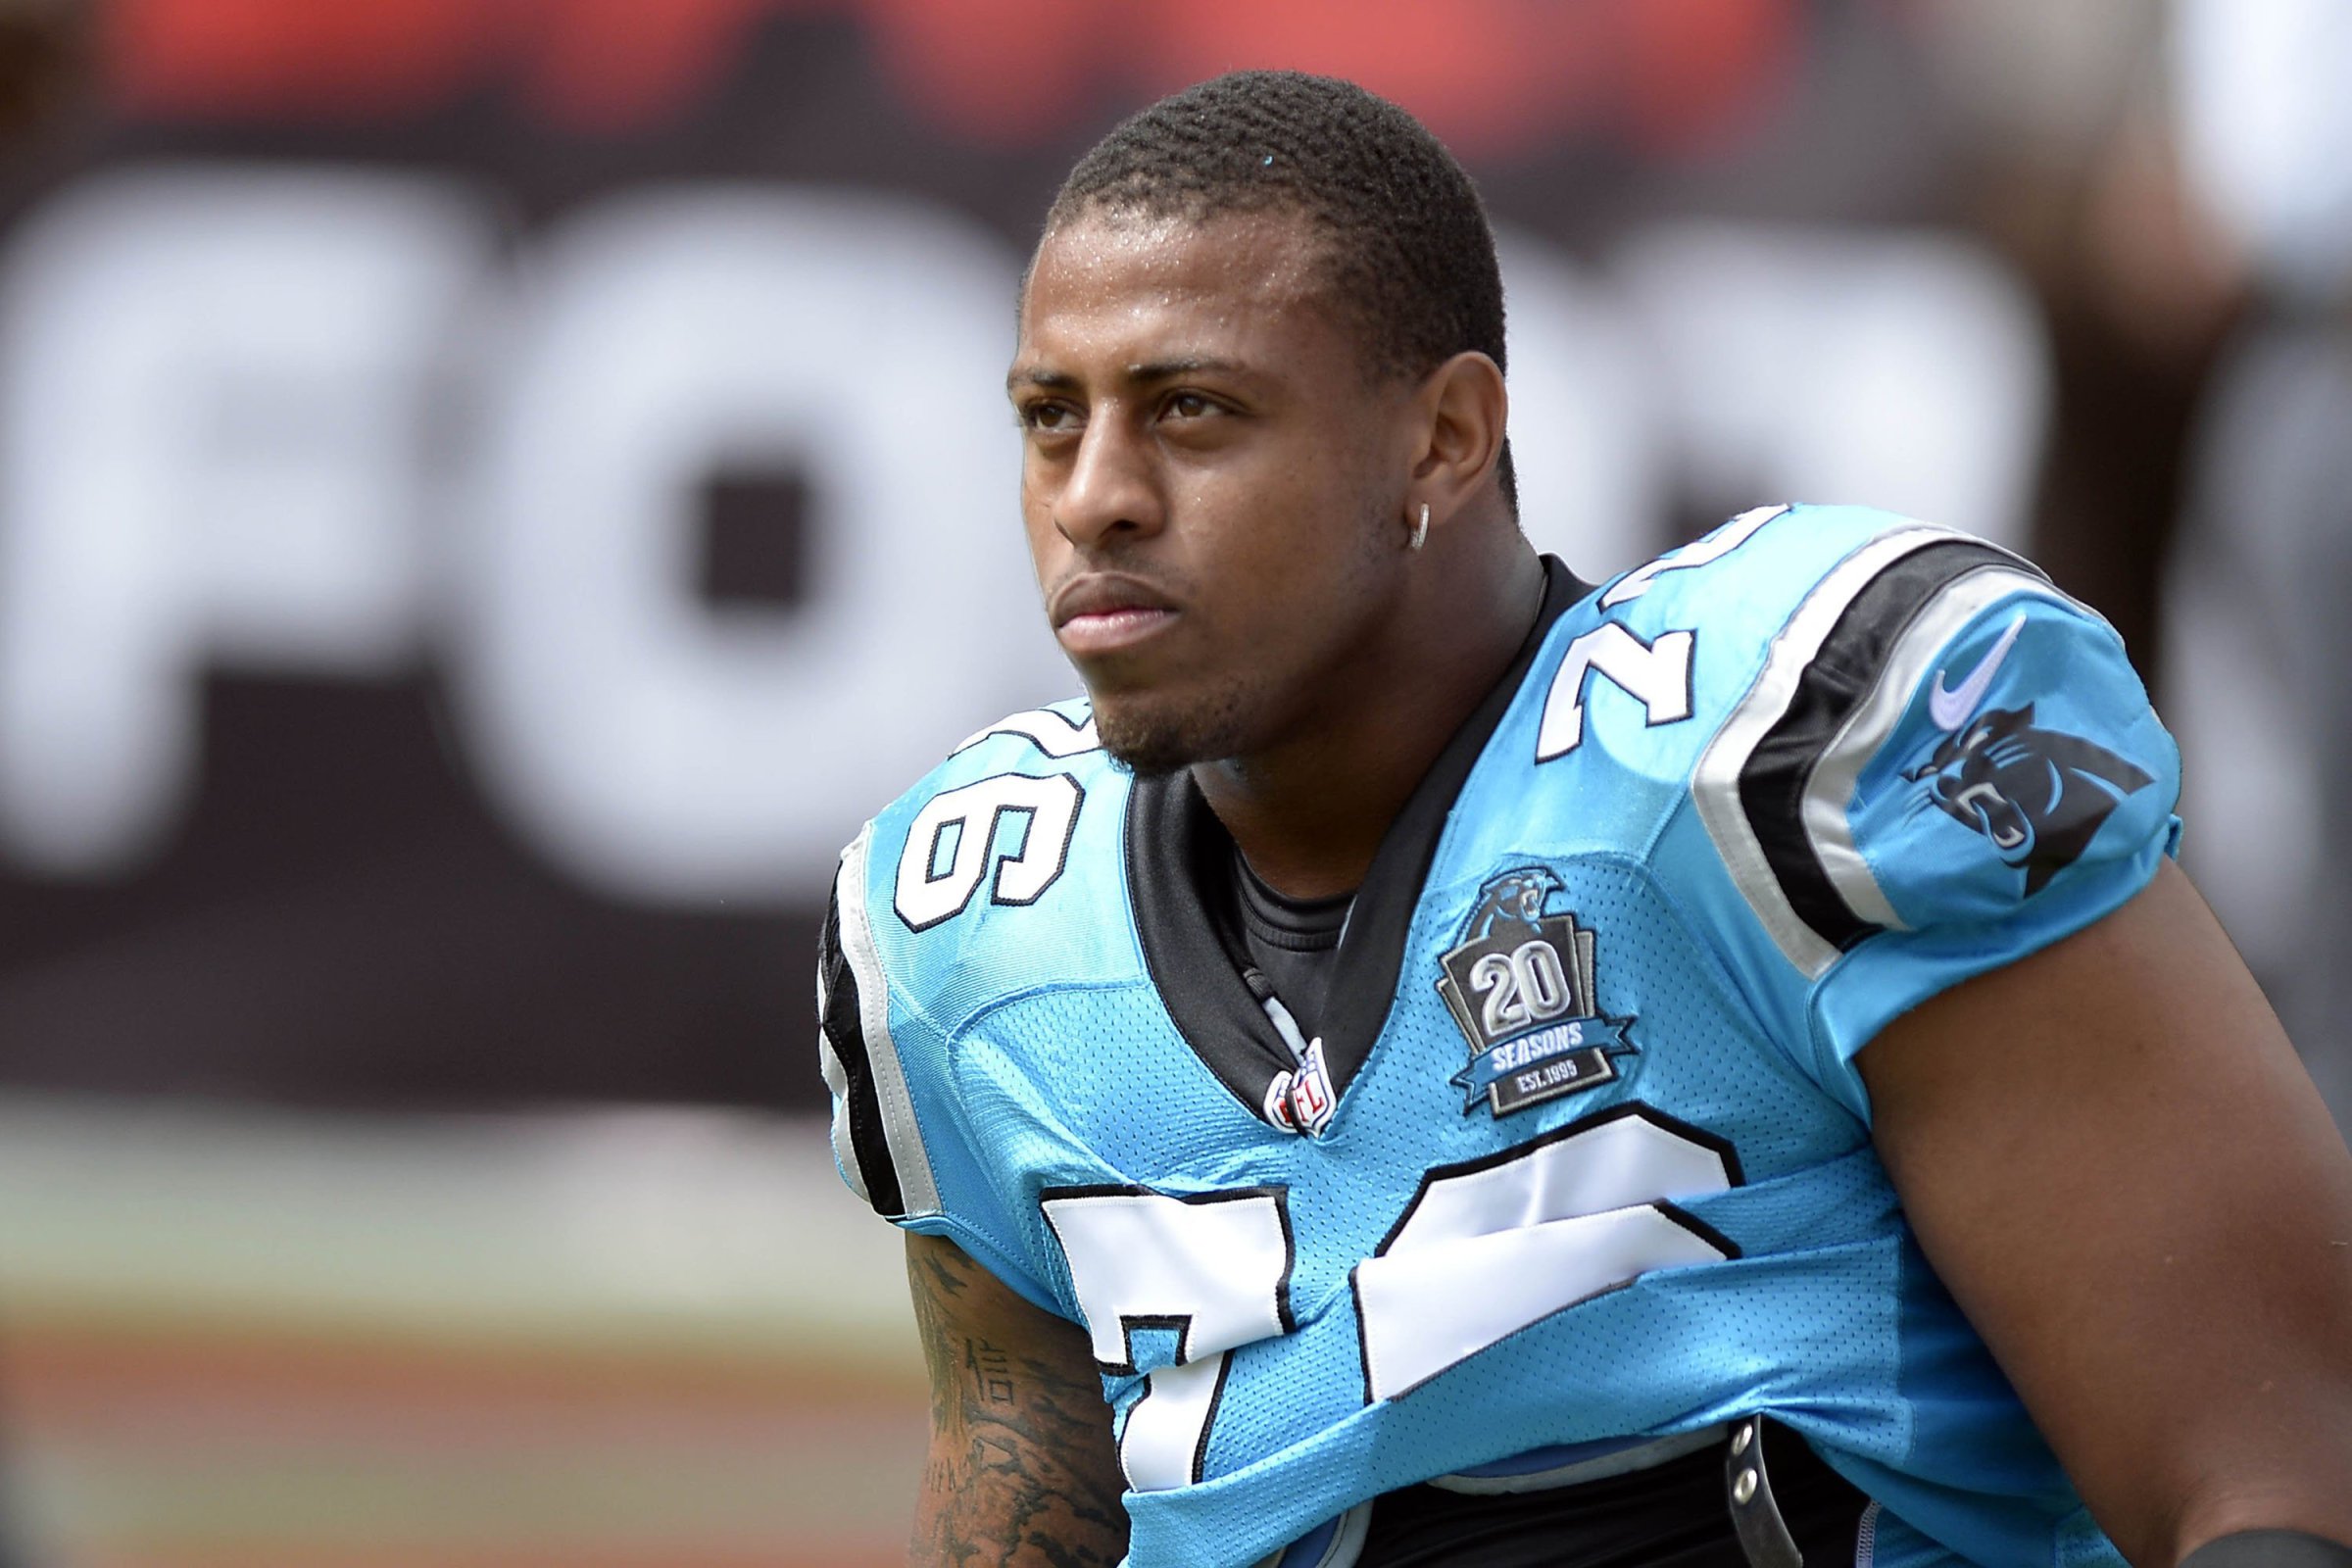 Greg Hardy of the Carolina Panthers looks out on the field during a game against the Tampa Bay Buccaneers on Sept. 7, 2014 in Tampa, Fla.